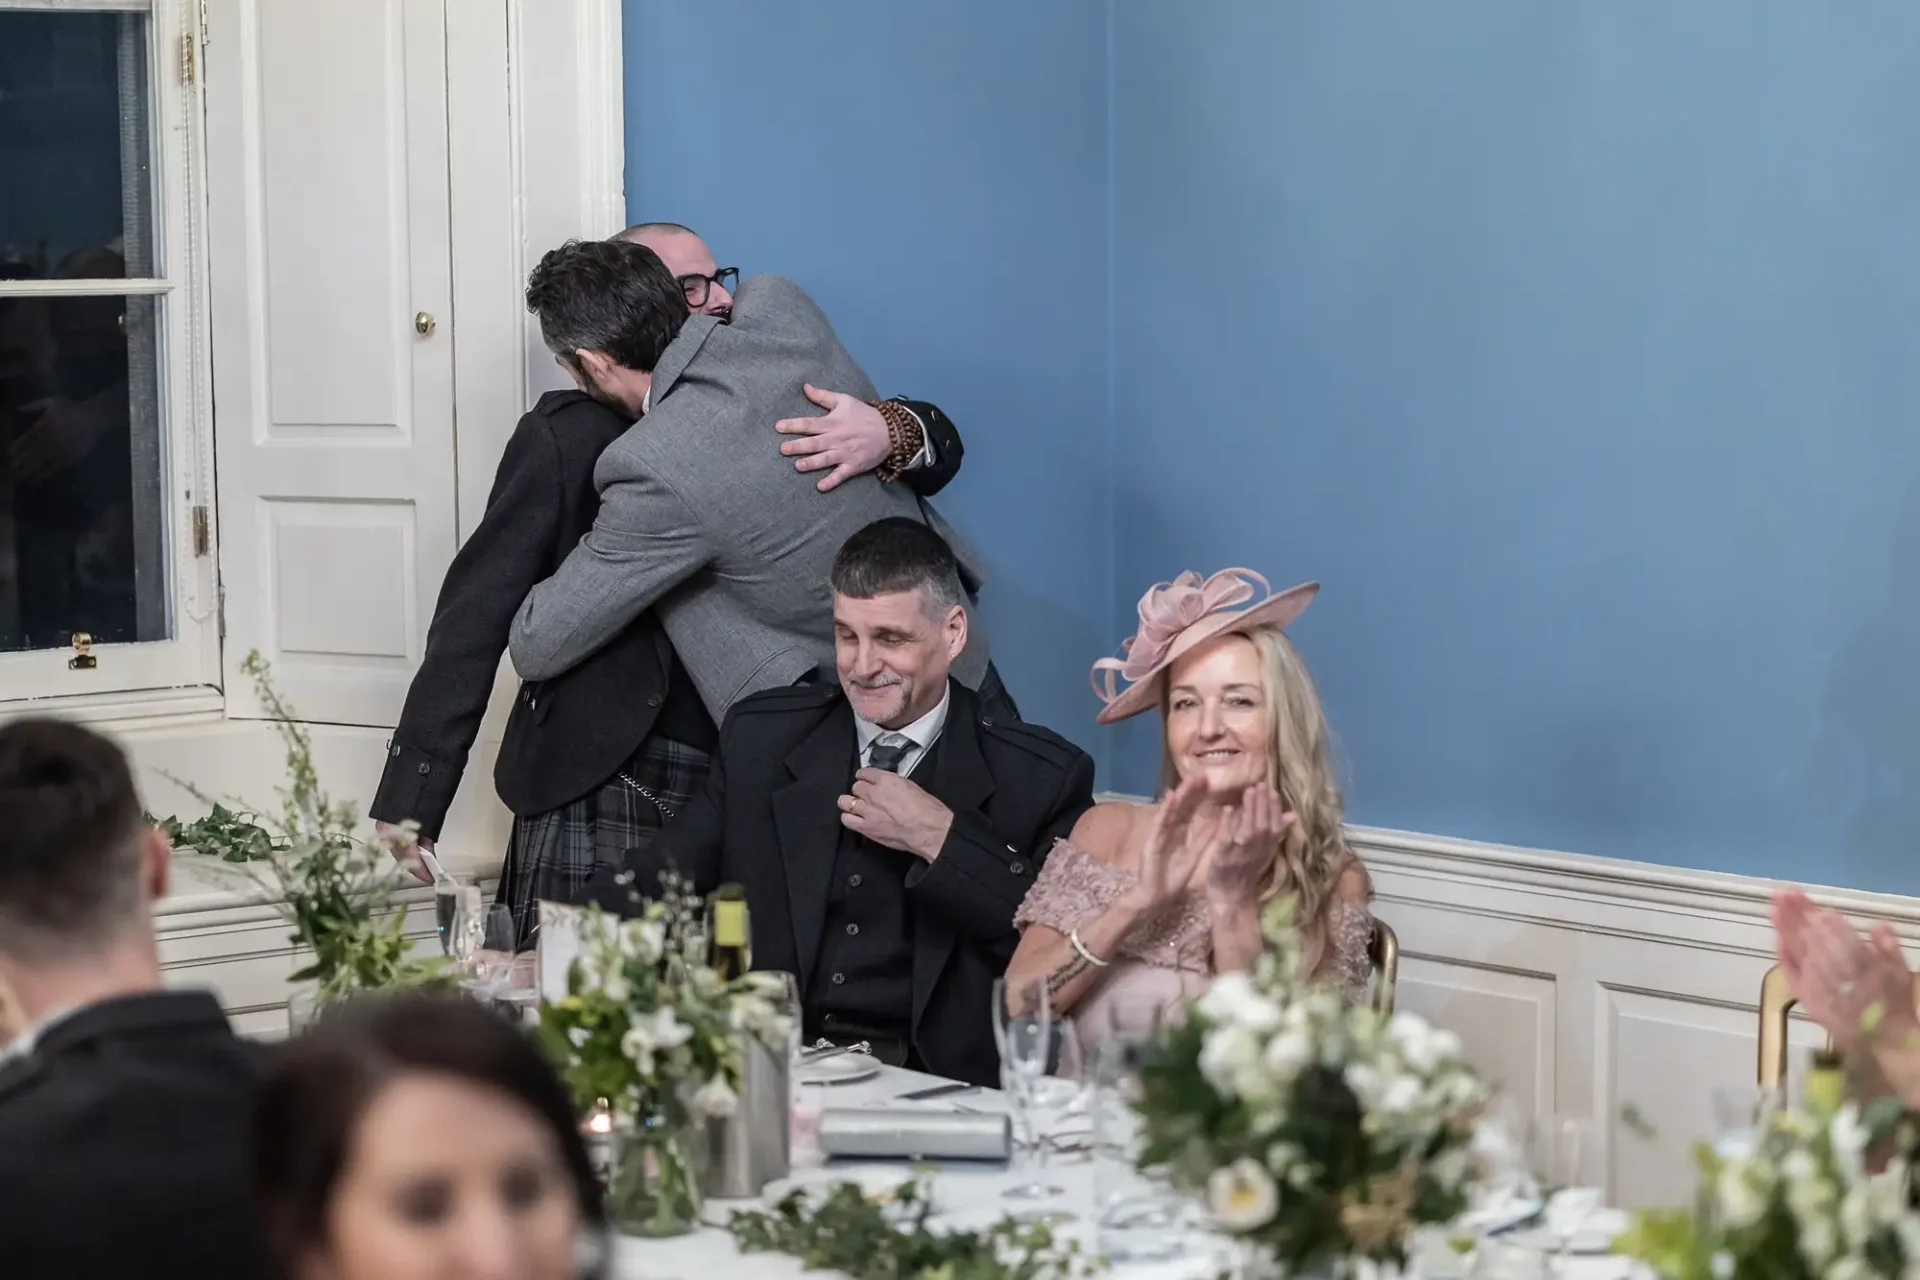 Two men embracing at a wedding reception while a seated man and woman look on, smiling, in a room with light blue walls and floral decorations.